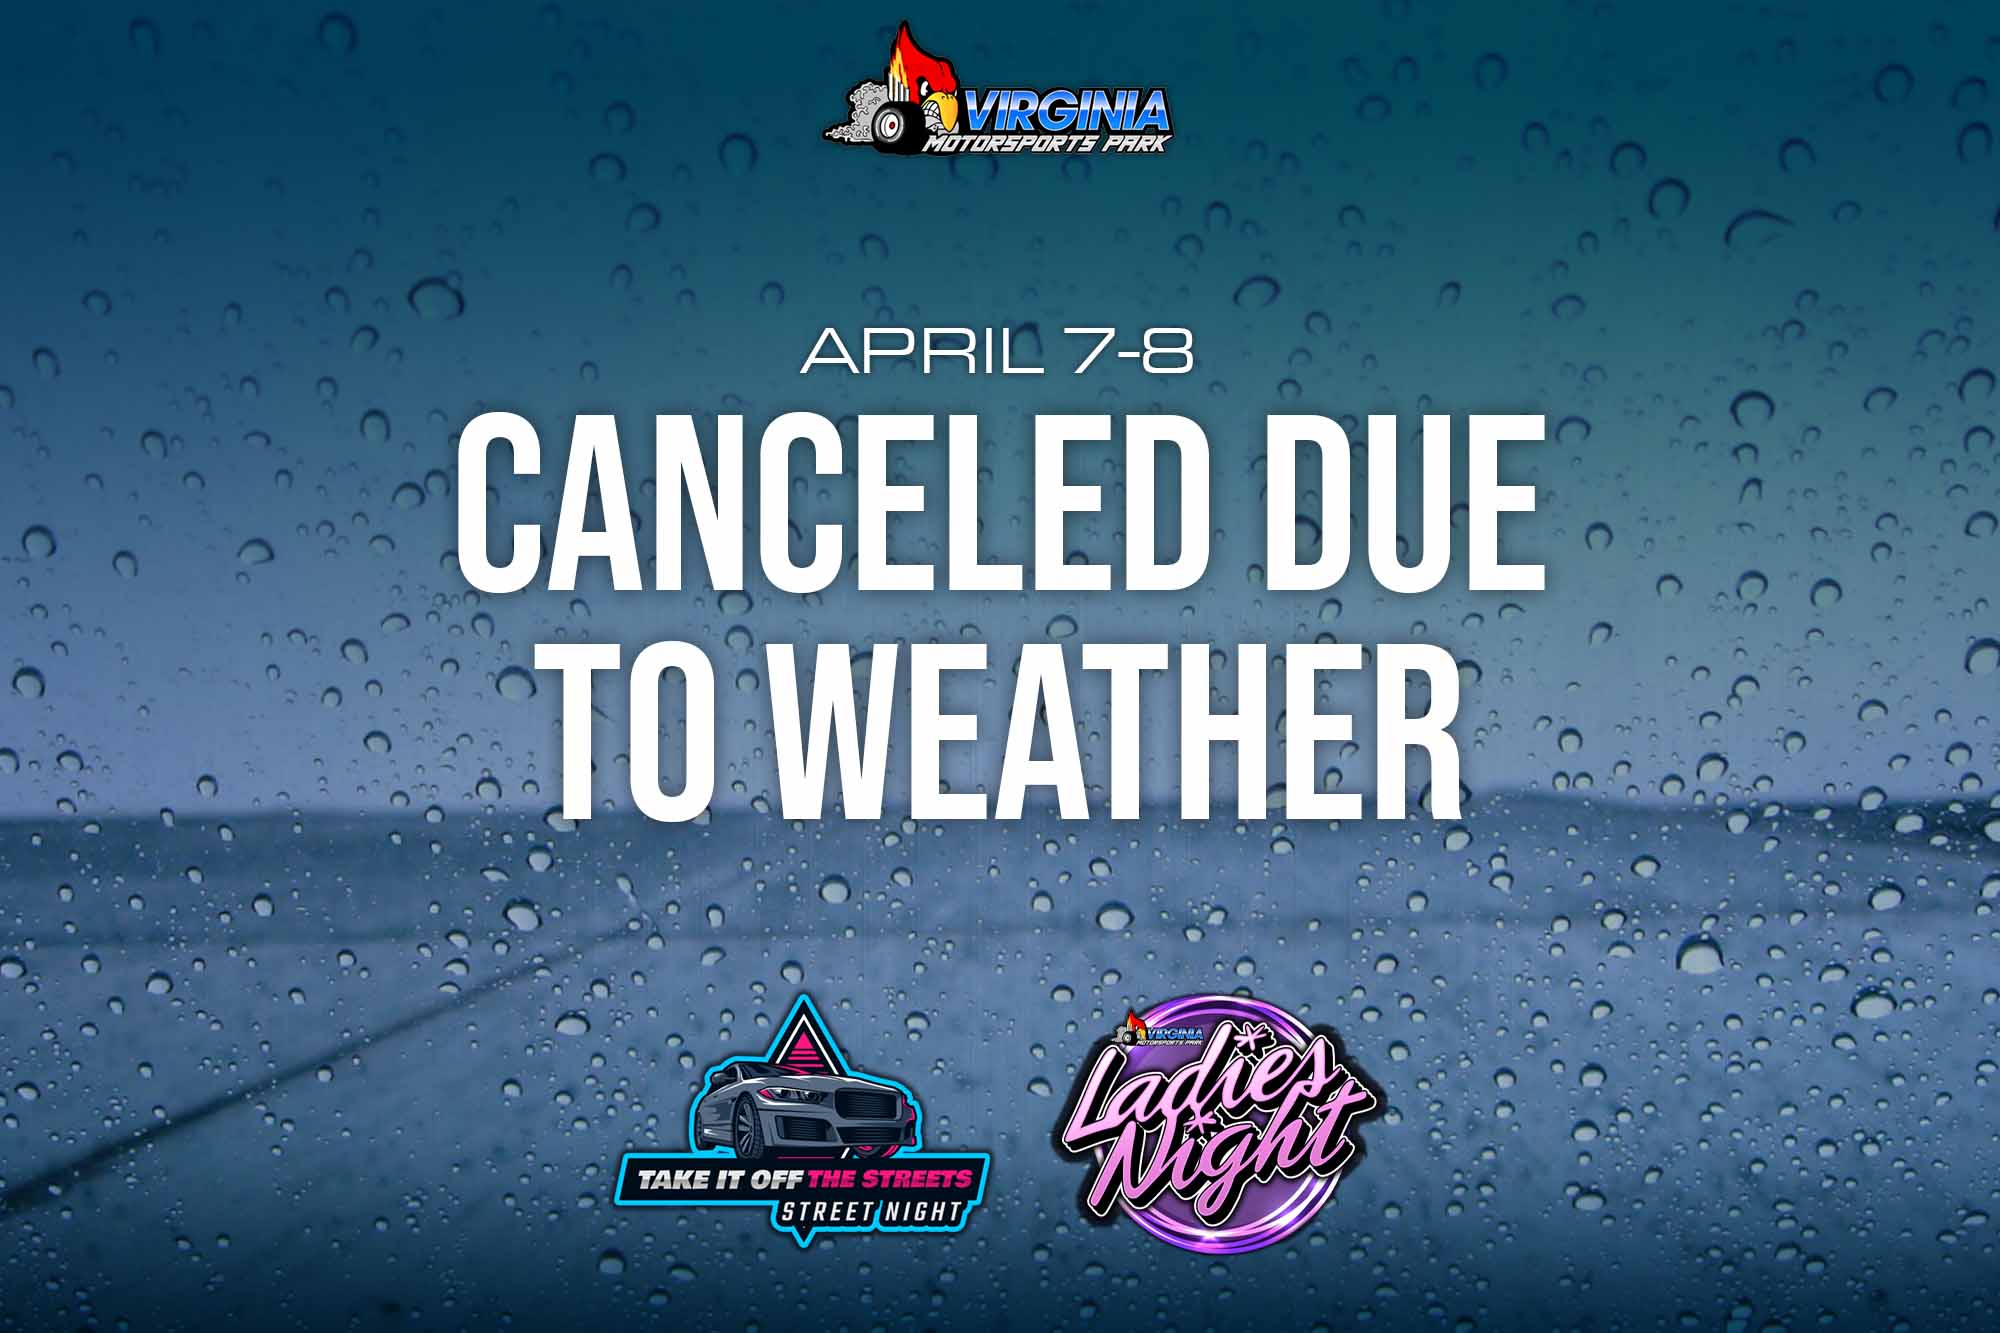 Canceled Due To Weather Take It Off The Streets And Ladies Night April 7 8 Virginia